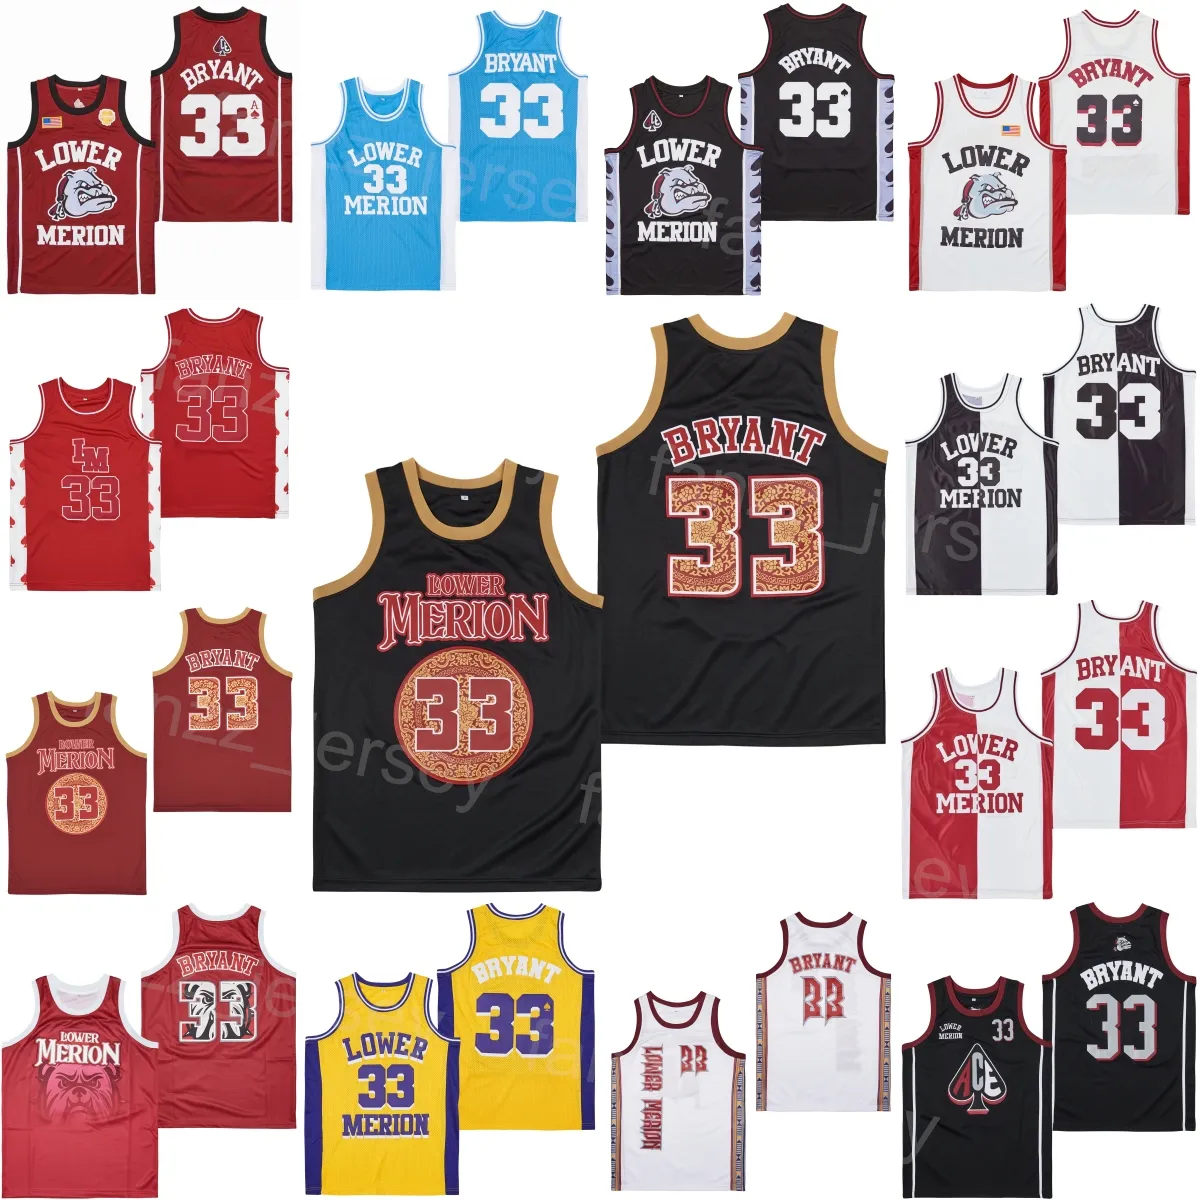 Mcdonalds Moive Basketball Jersey BRYANT Lower Merion College All American Pure Cotton Black Red White Grey Team All Stitched For Sport Fans Pullover Vintage Man